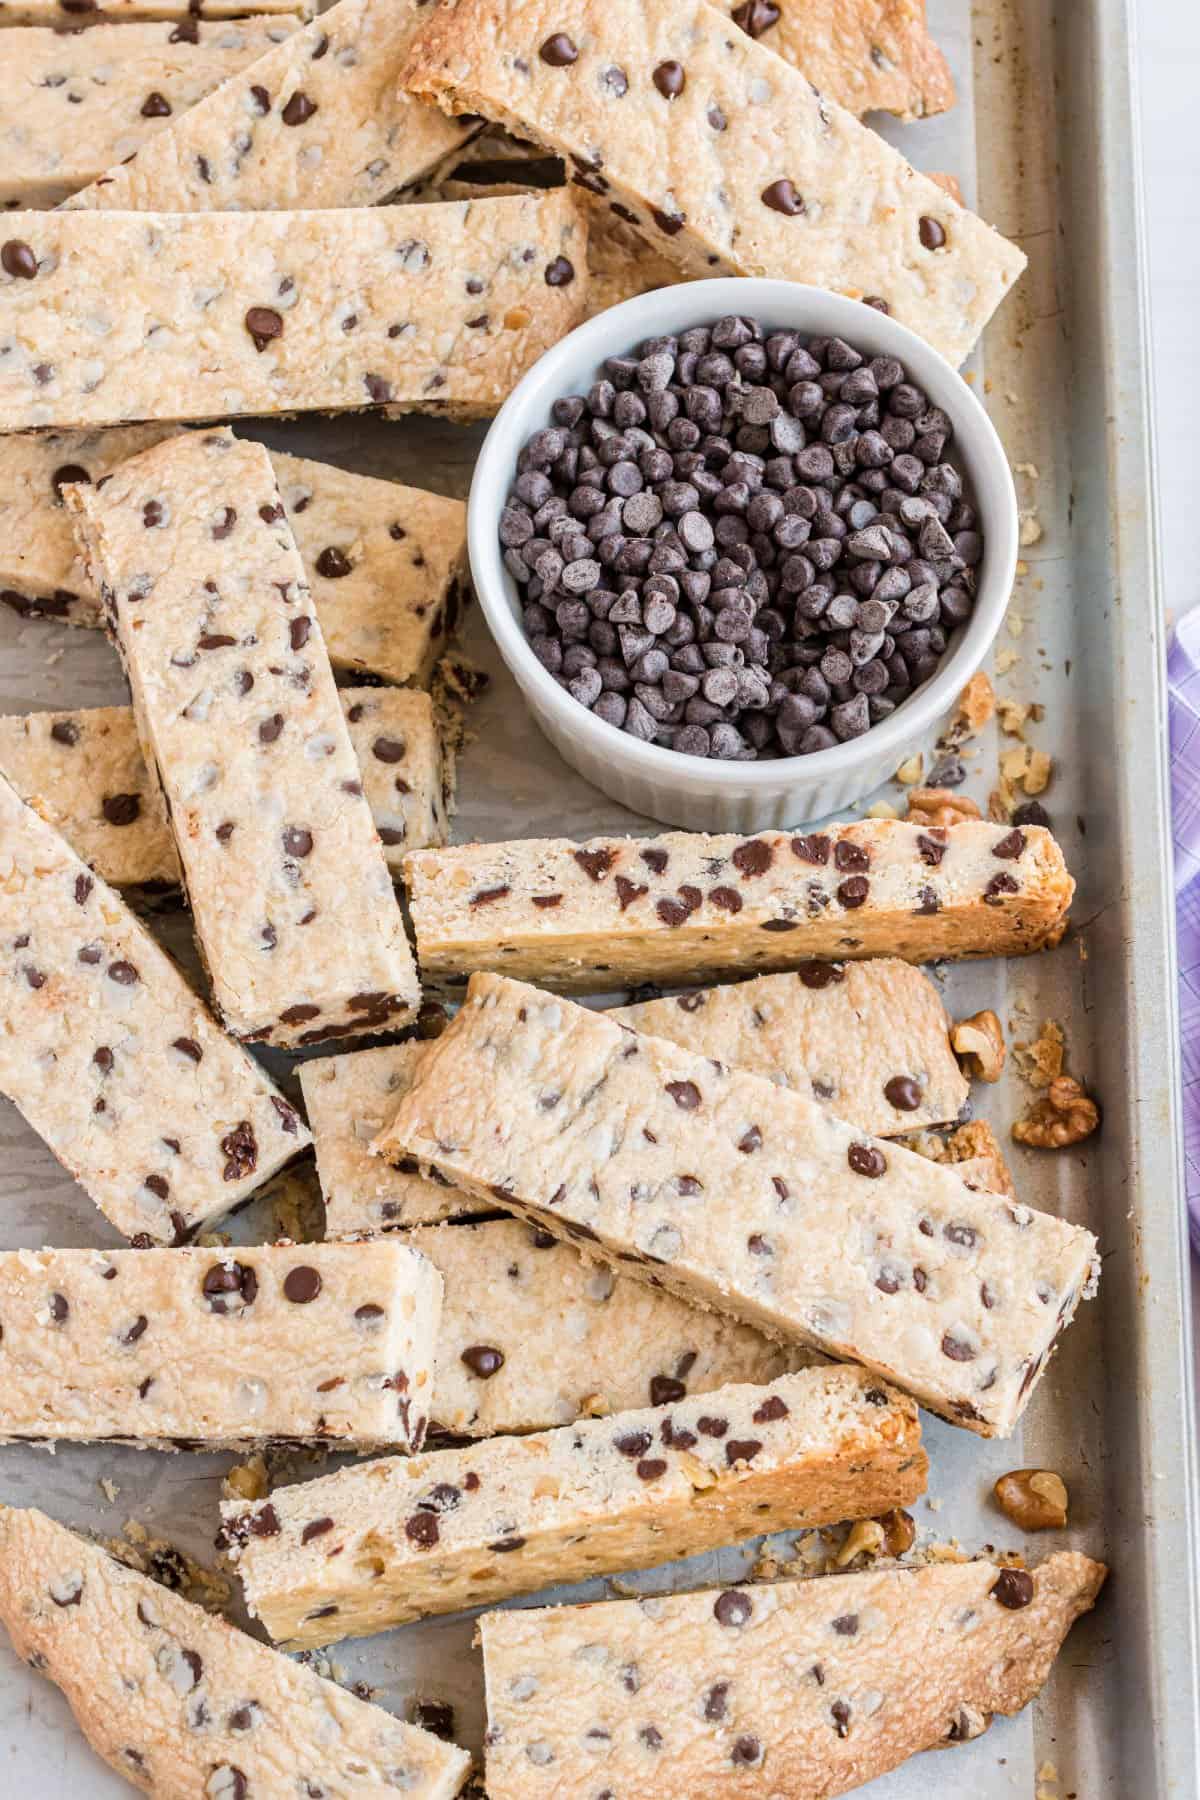 Stacks of shortbread cookie sticks with chocolate chips on a cookie sheet.